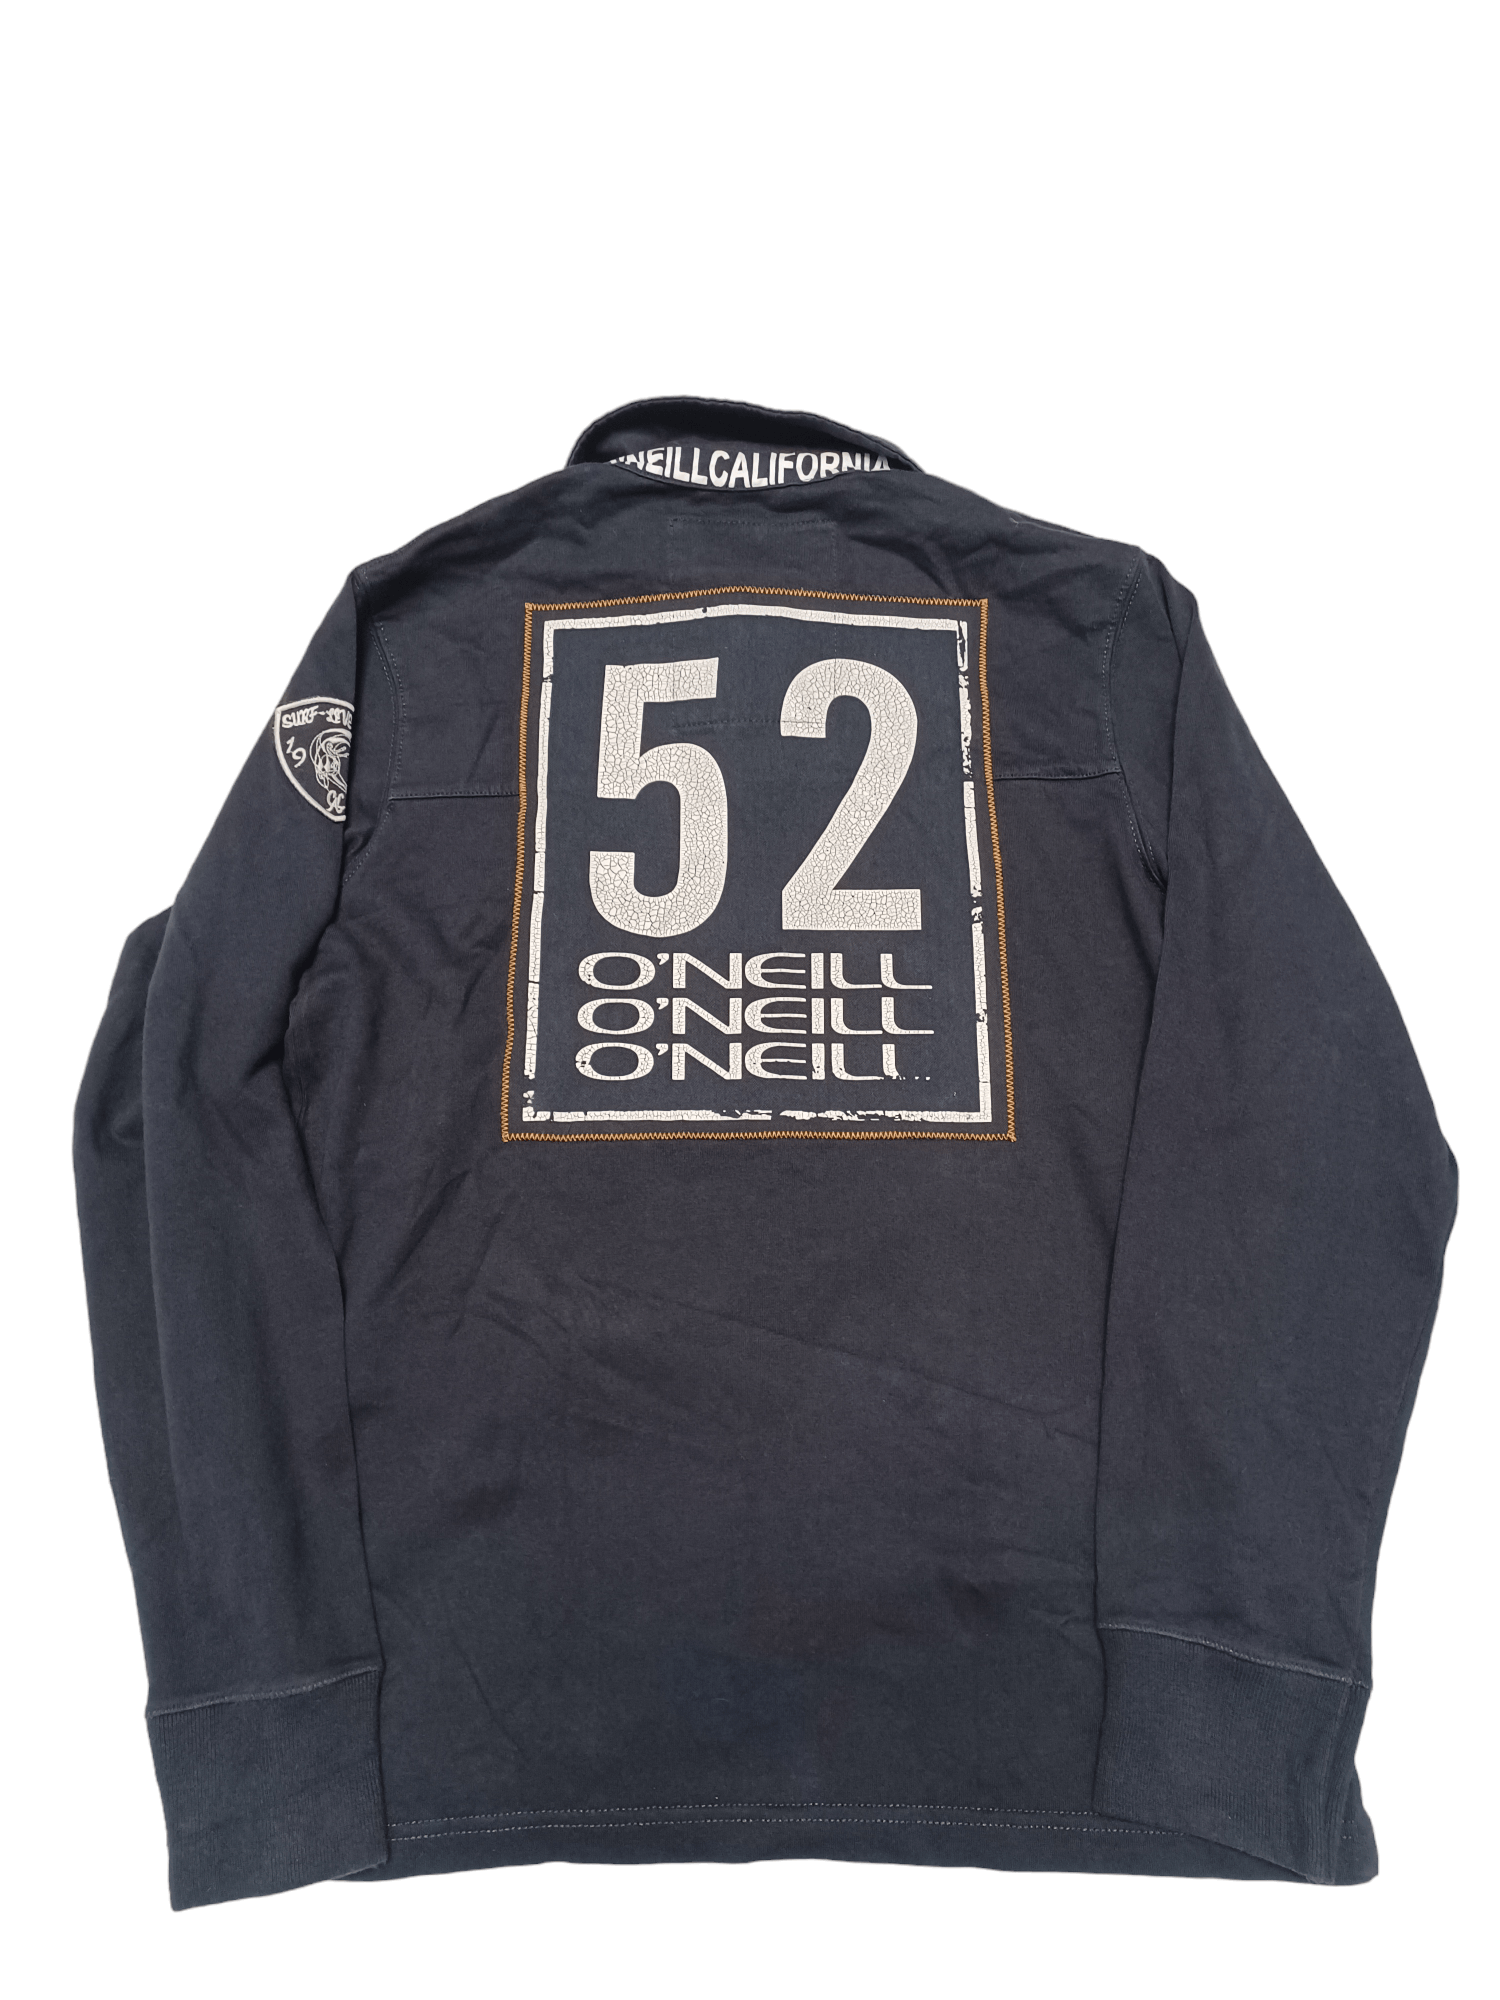 Pre-owned Oneill X Surf Style Oneill Vintage Surf Style Rugby Shirt Sweatshirt Tee In Black